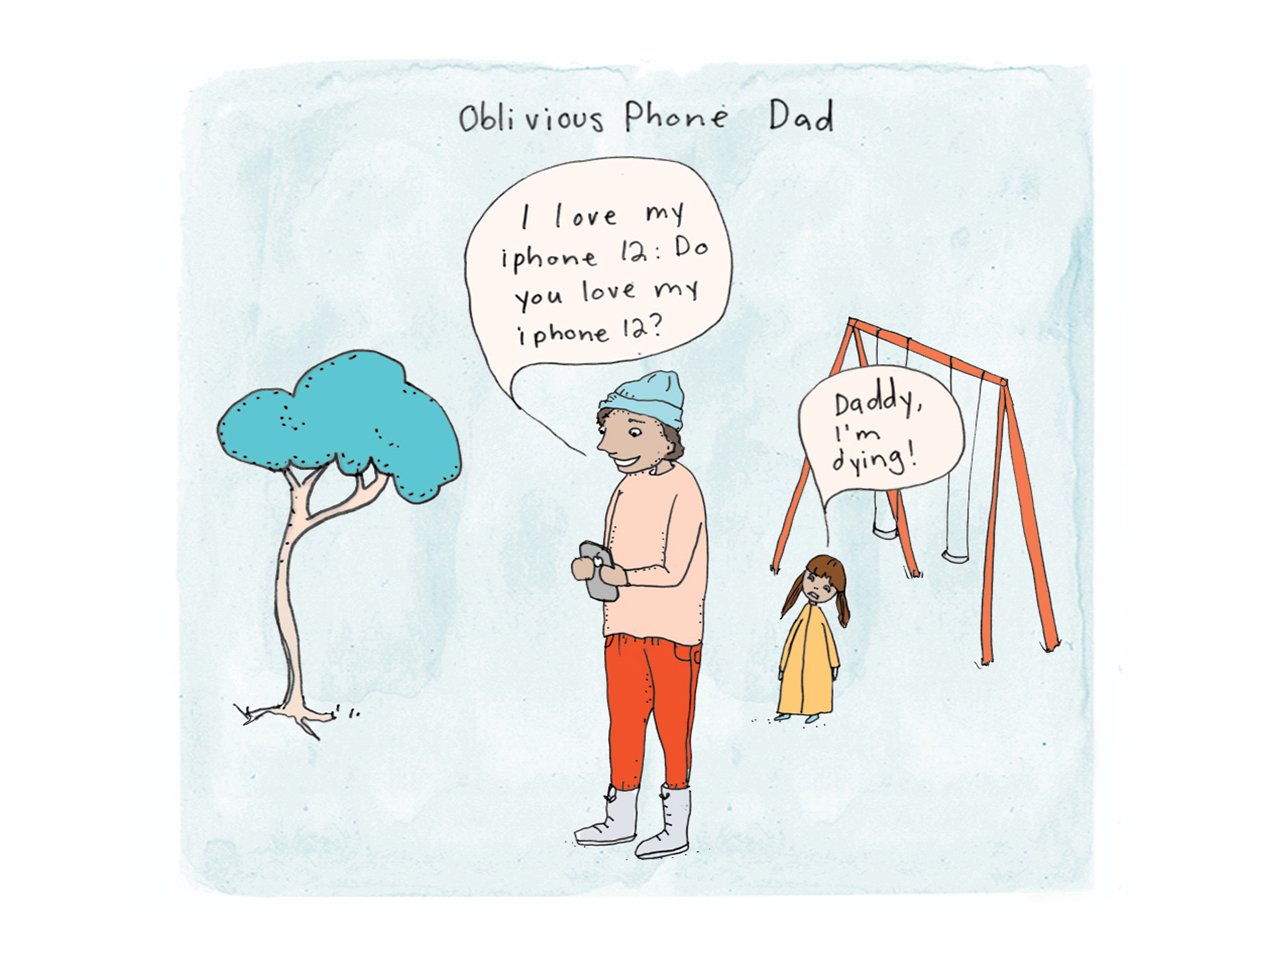 Illustration of a dad on his phone at the playground. Speech bubble says "I love my iPhone 12. do you love my iphone 12?" behind him his kid is standing by the swings saying "daddy I'm dying" Caption reads Oblivious phone dad